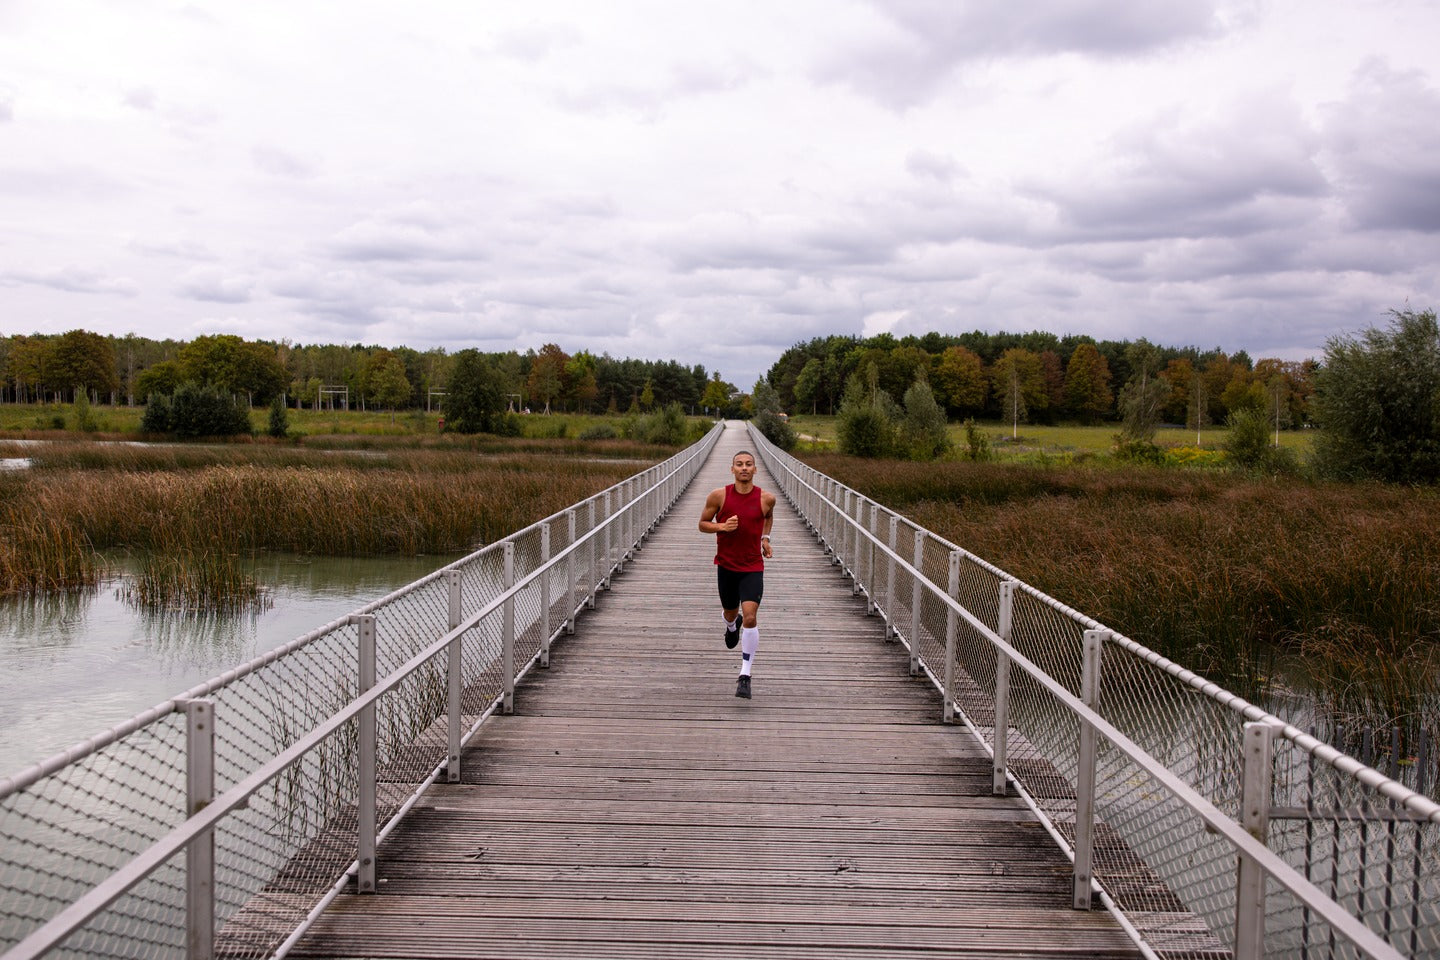 man running down wood dock in cep apparel and socks